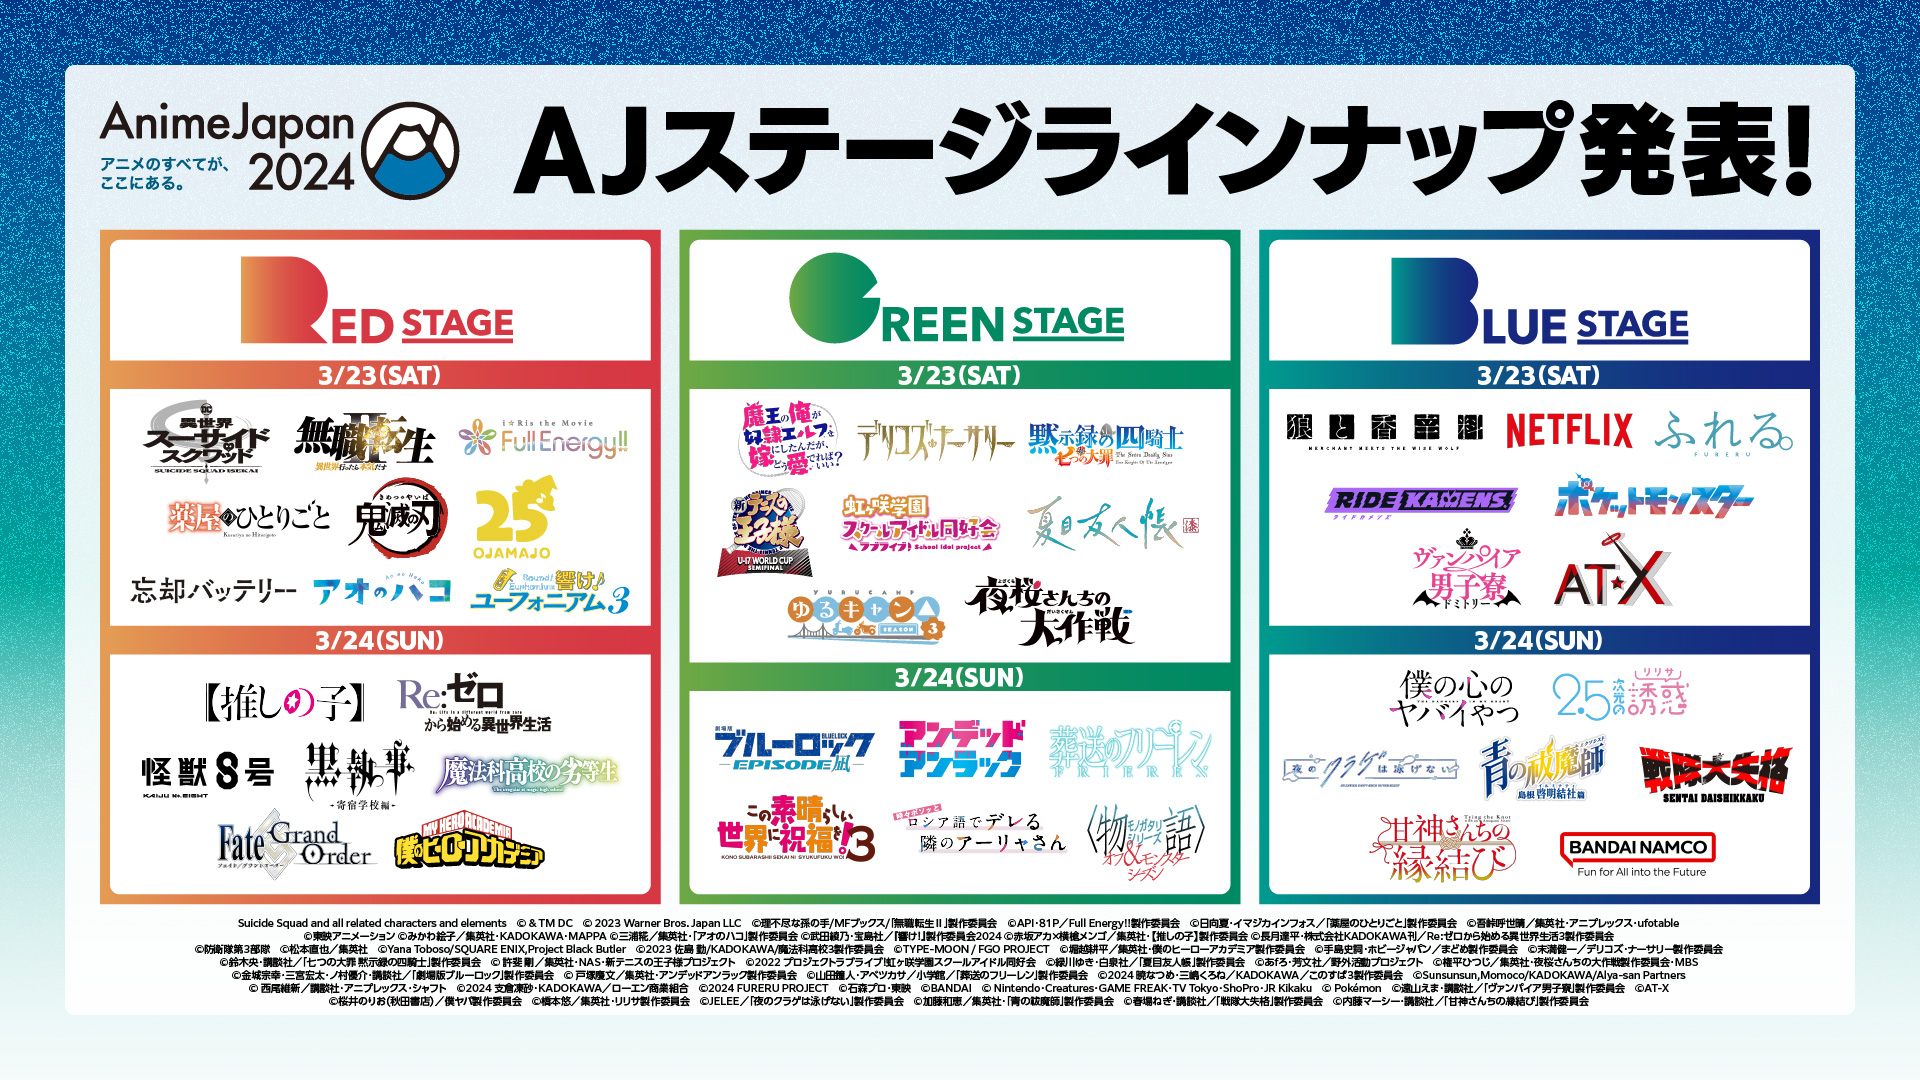 AnimeJapan 2024 Stages and Featured Anime Revealed